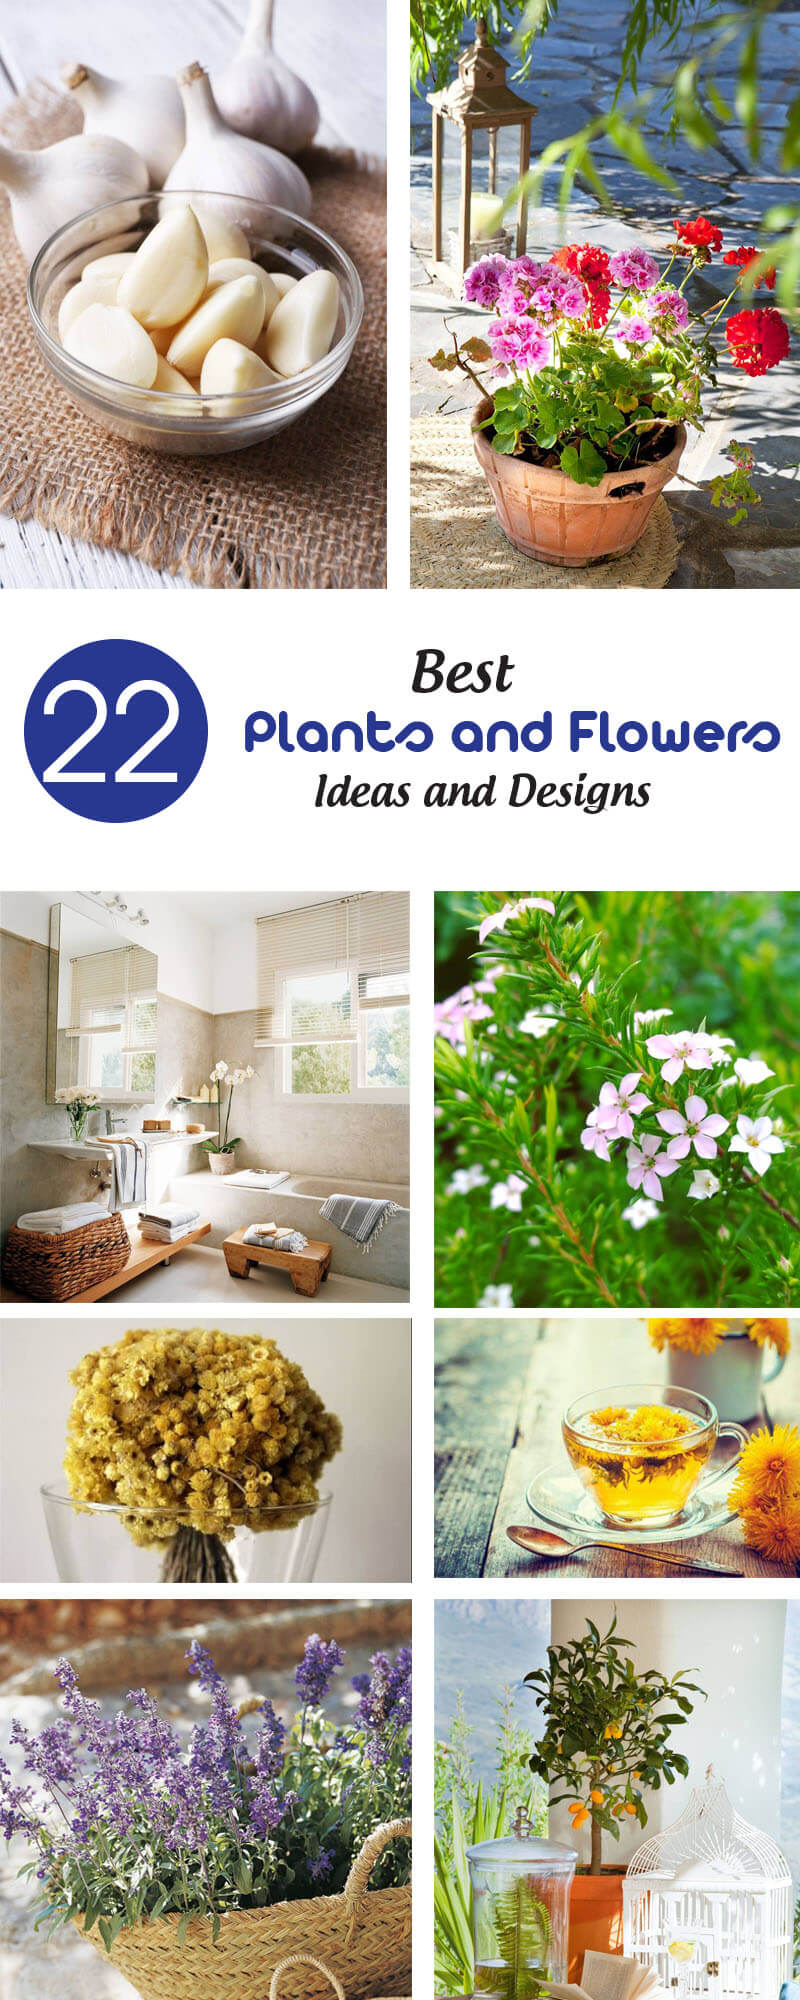 best plants and flowers ideas